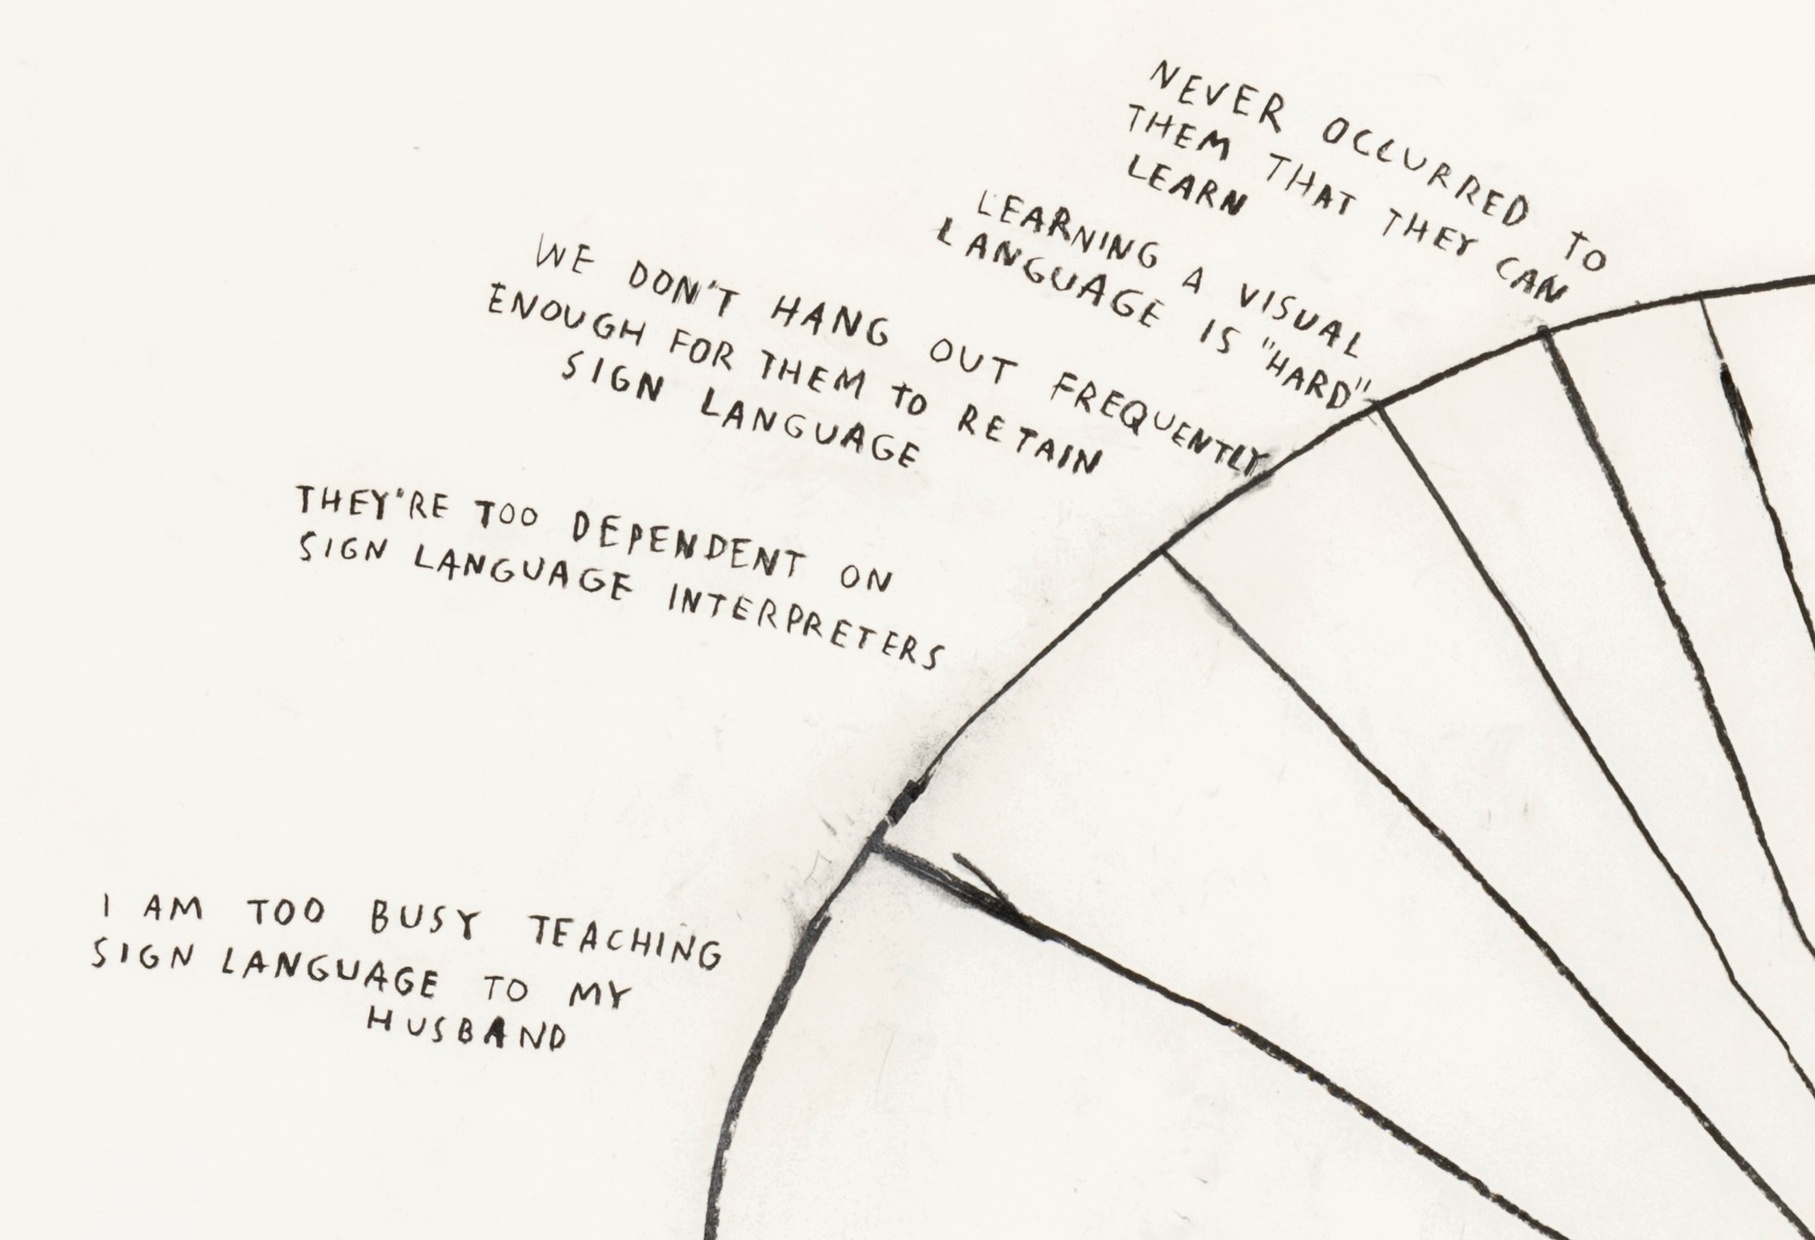 Details of a pie chart with the words “Never Occurred to them that they can" and "Learning a visual language is hard" and "I am too busy teaching sign language to my husband."